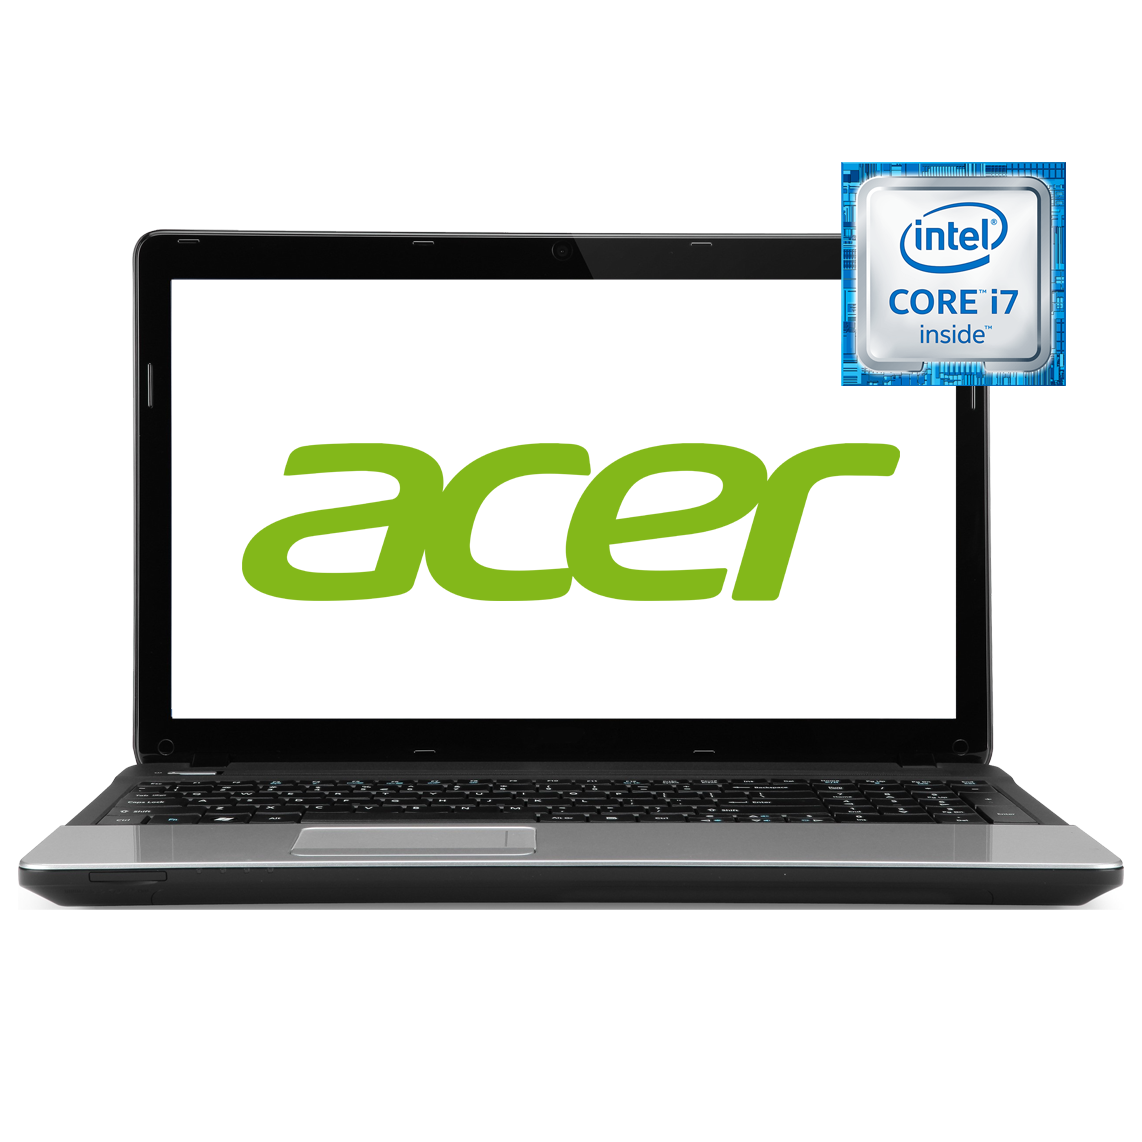 Acer - 17.3 inch Core i7 2nd Gen